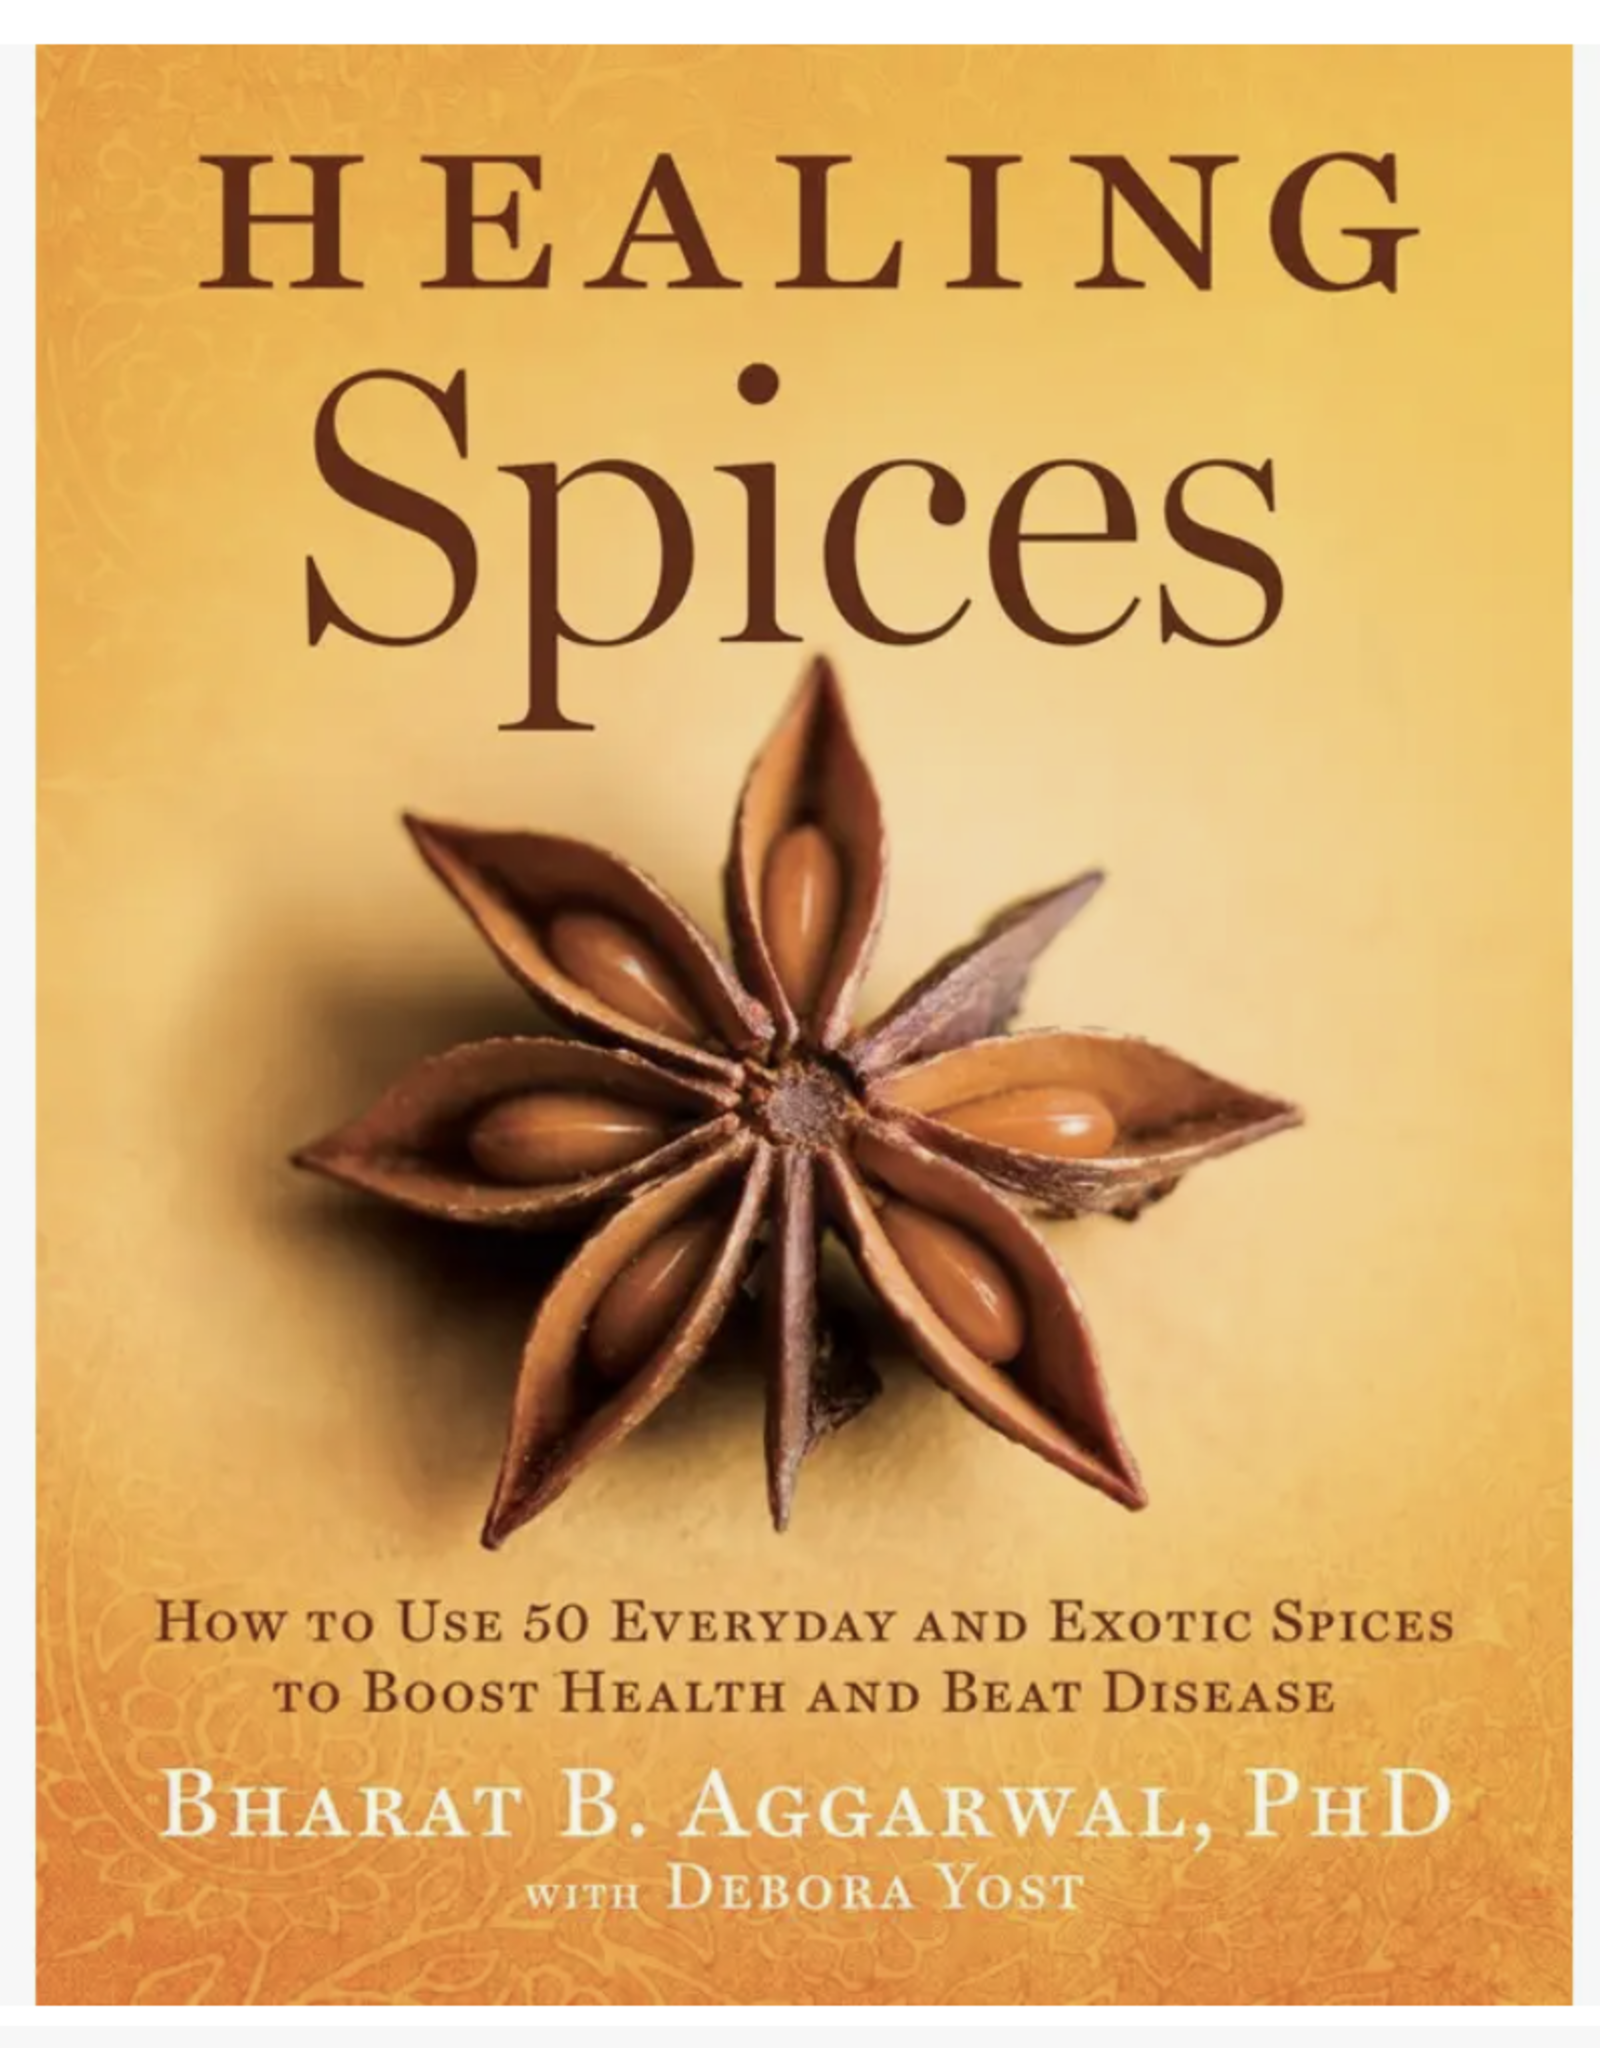 Union Square & Co. Healing Spices Book